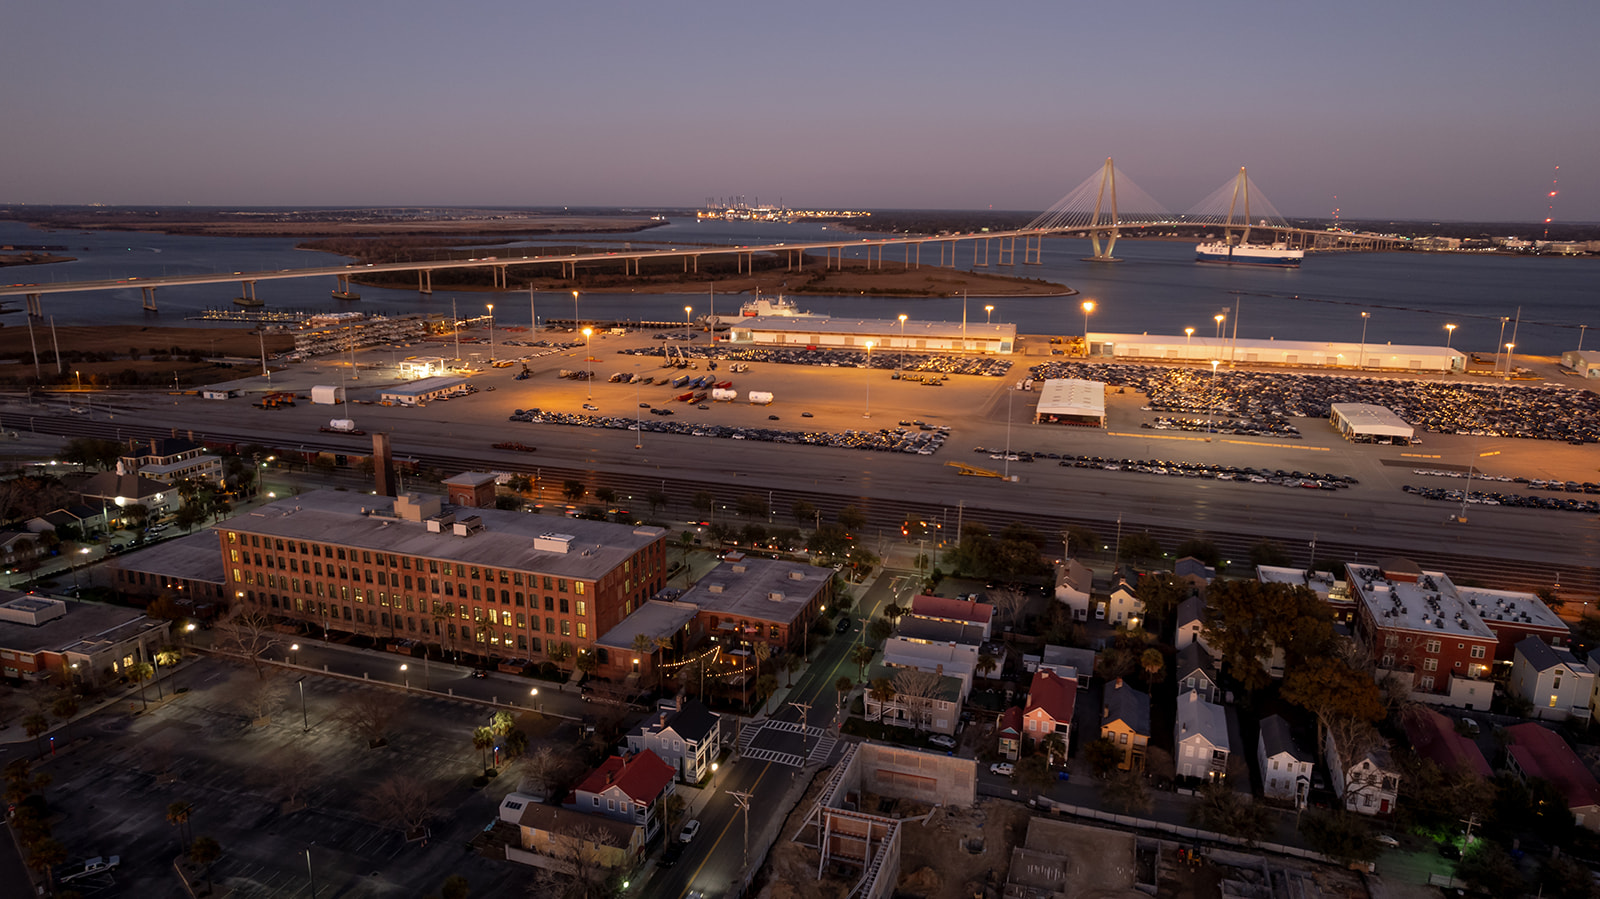 Aerial photo of the cedar room with the charleston harbor in the background. Photographed during sunset